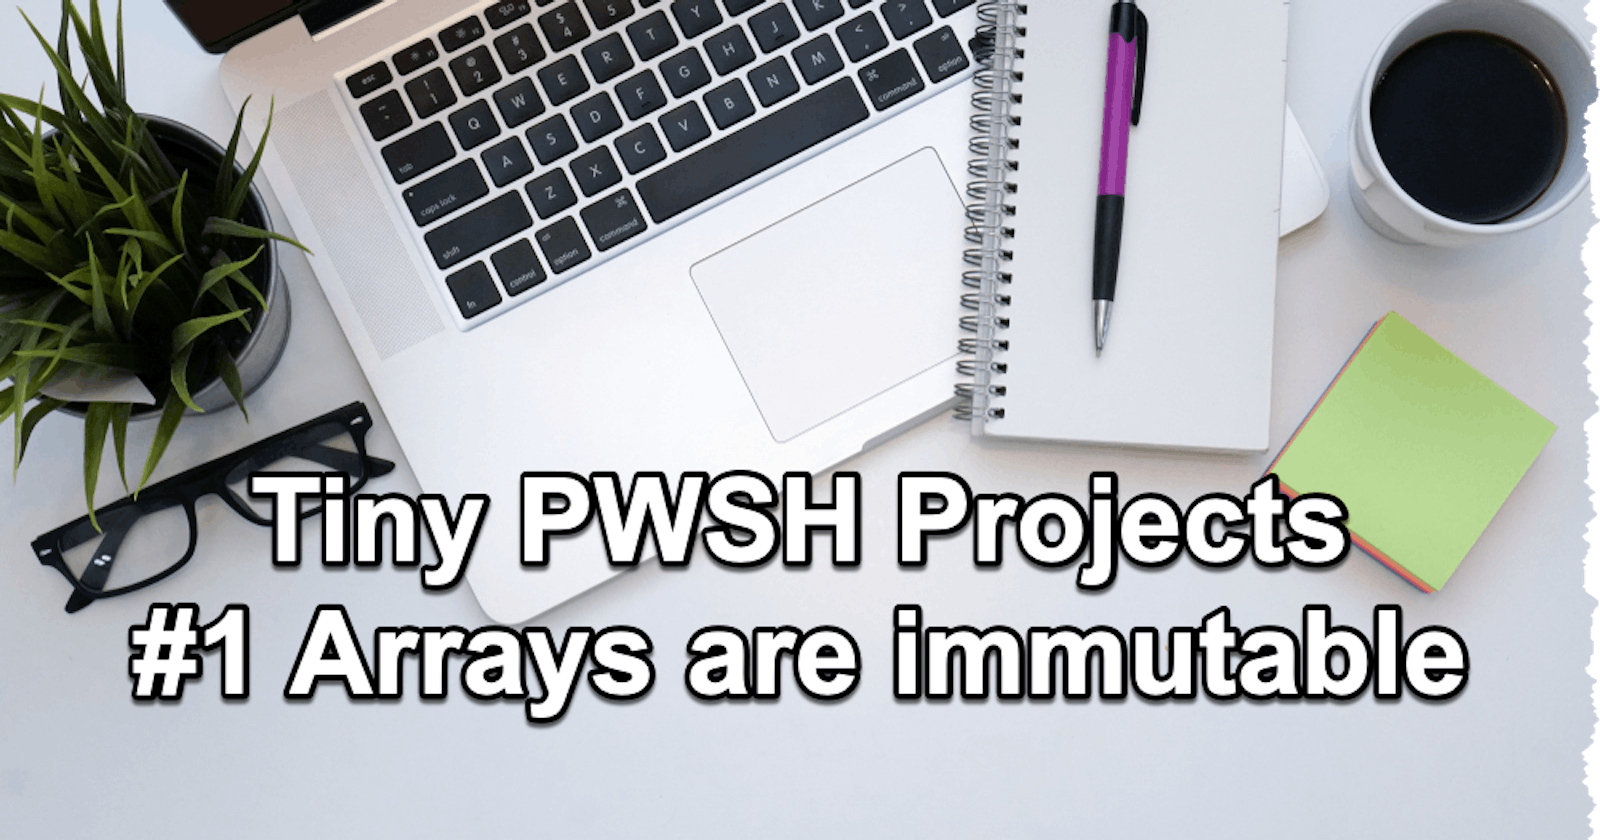 Tiny PowerShell Project 1 - Arrays are immutable